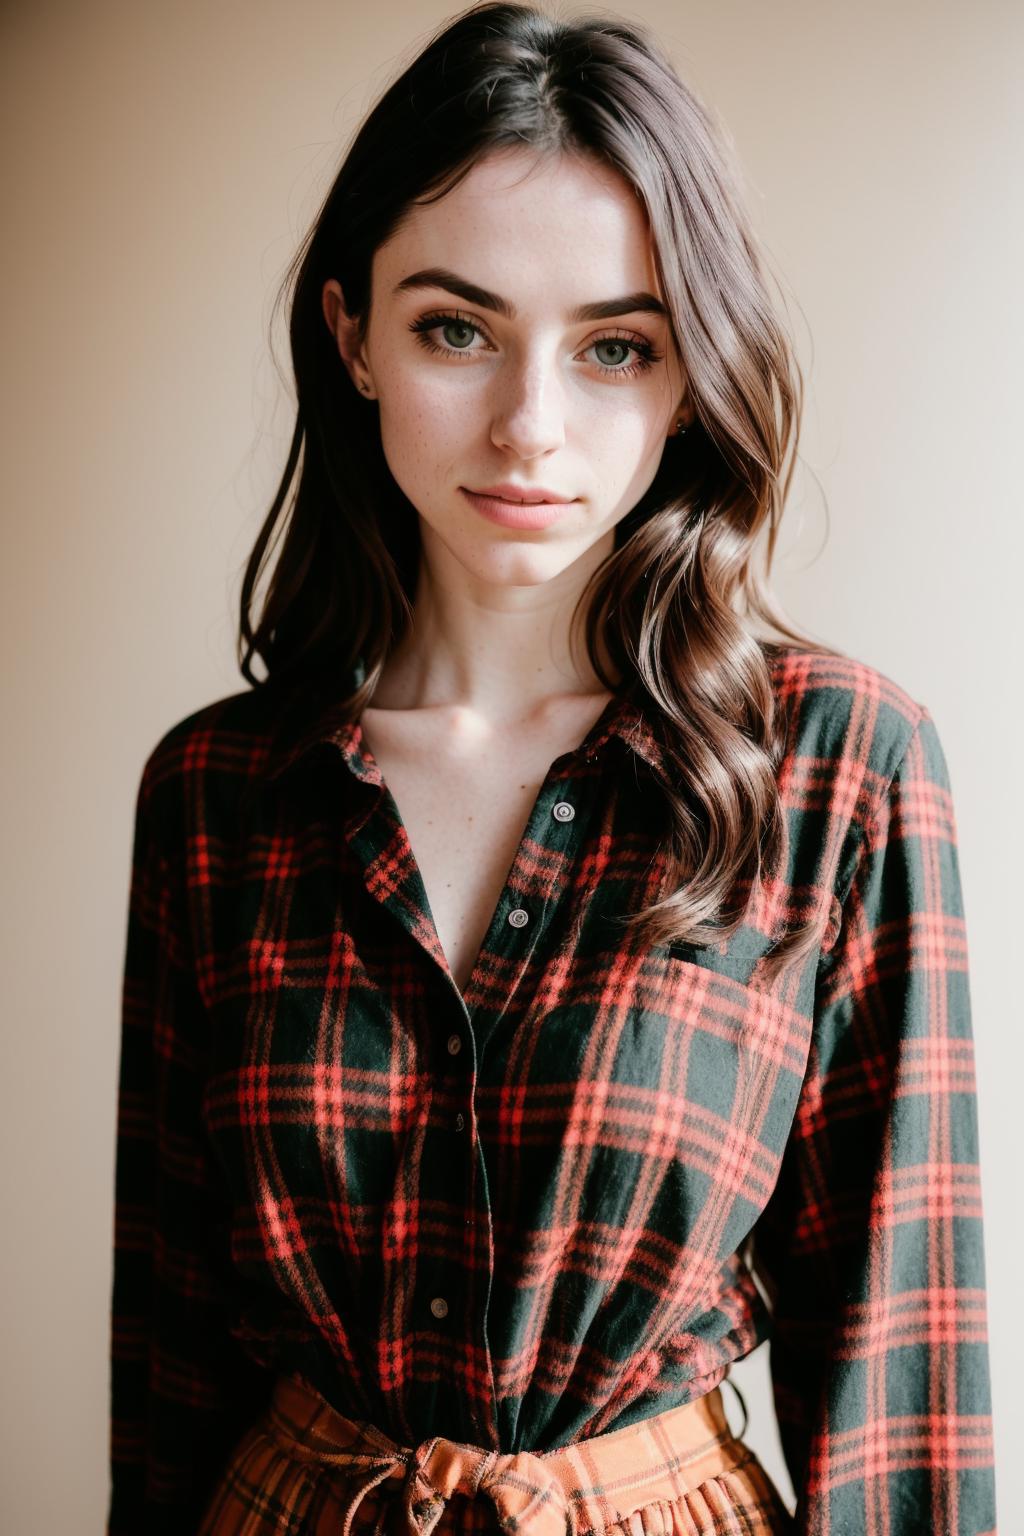 A woman in a red plaid shirt looking at the camera.